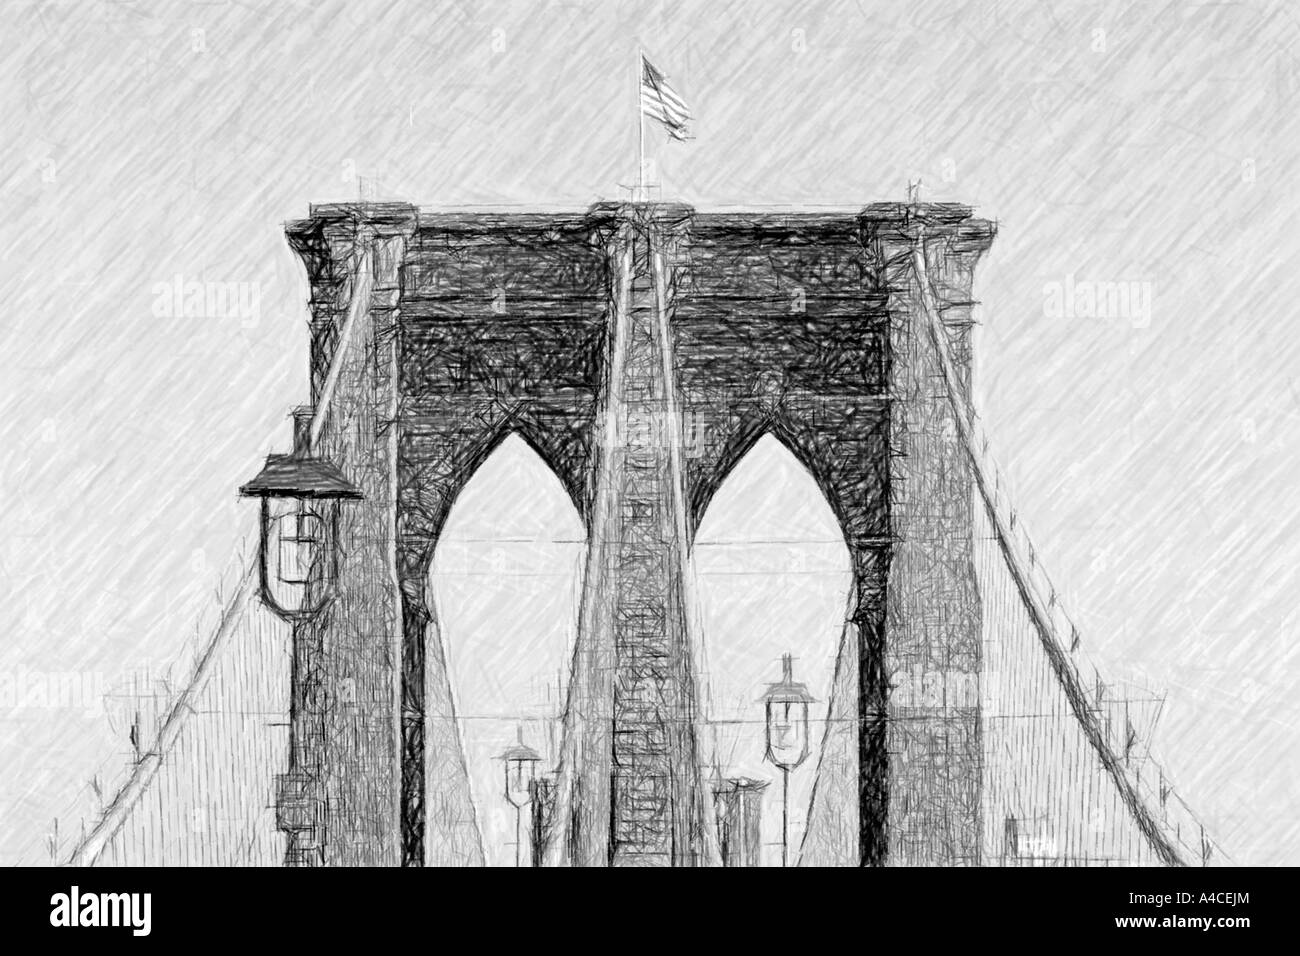 Brooklyn Bridge as a Charcoal or drawing, digitally rendered Stock Photo